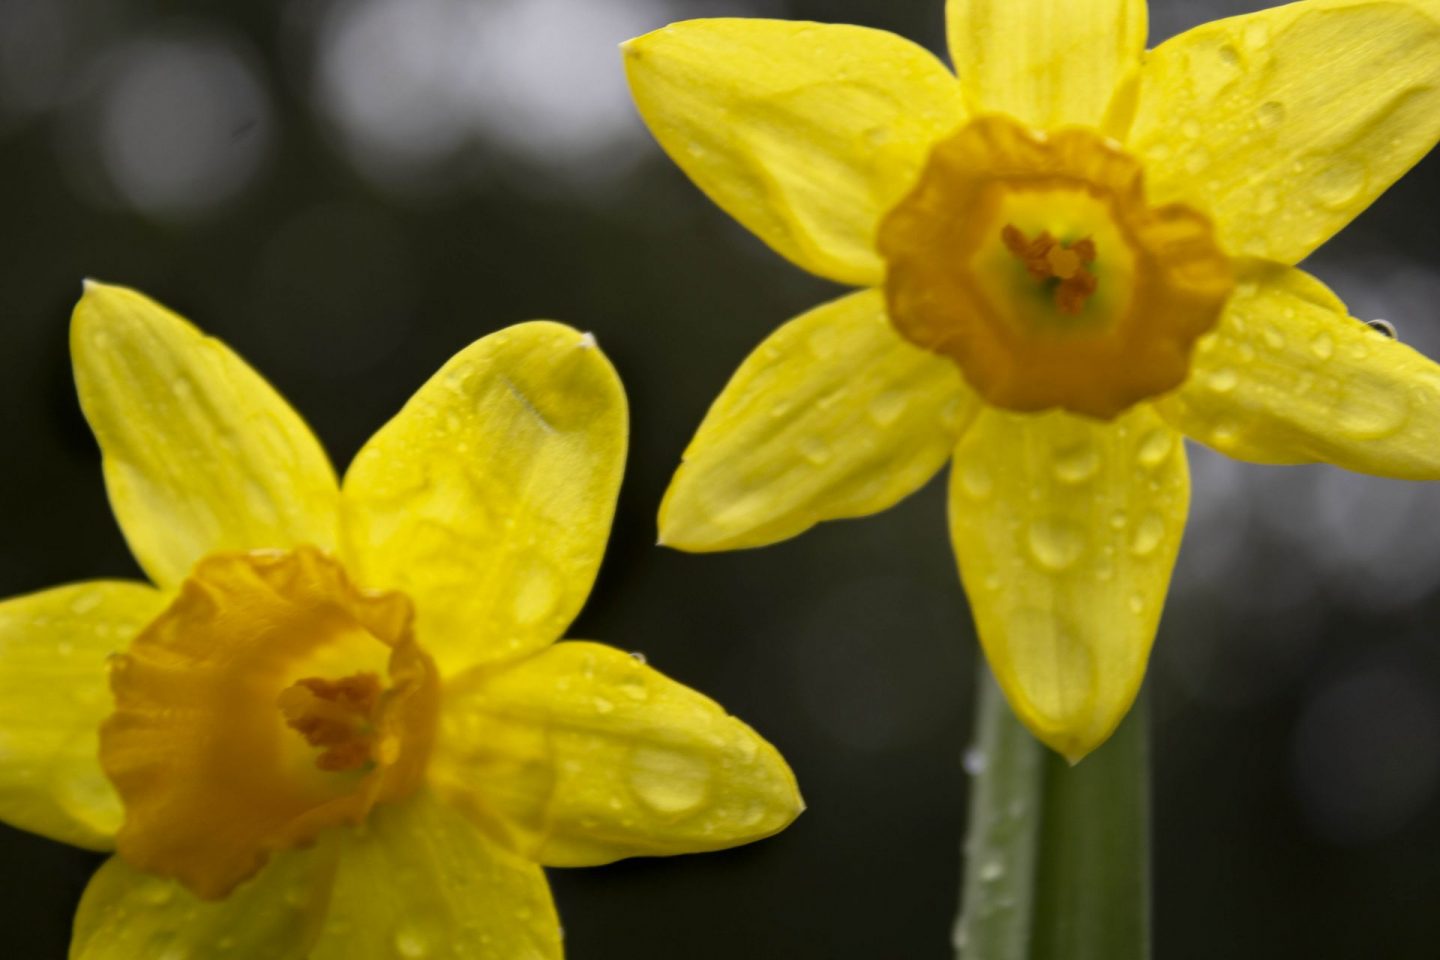 Reasons to be cheerful daffodils in flower